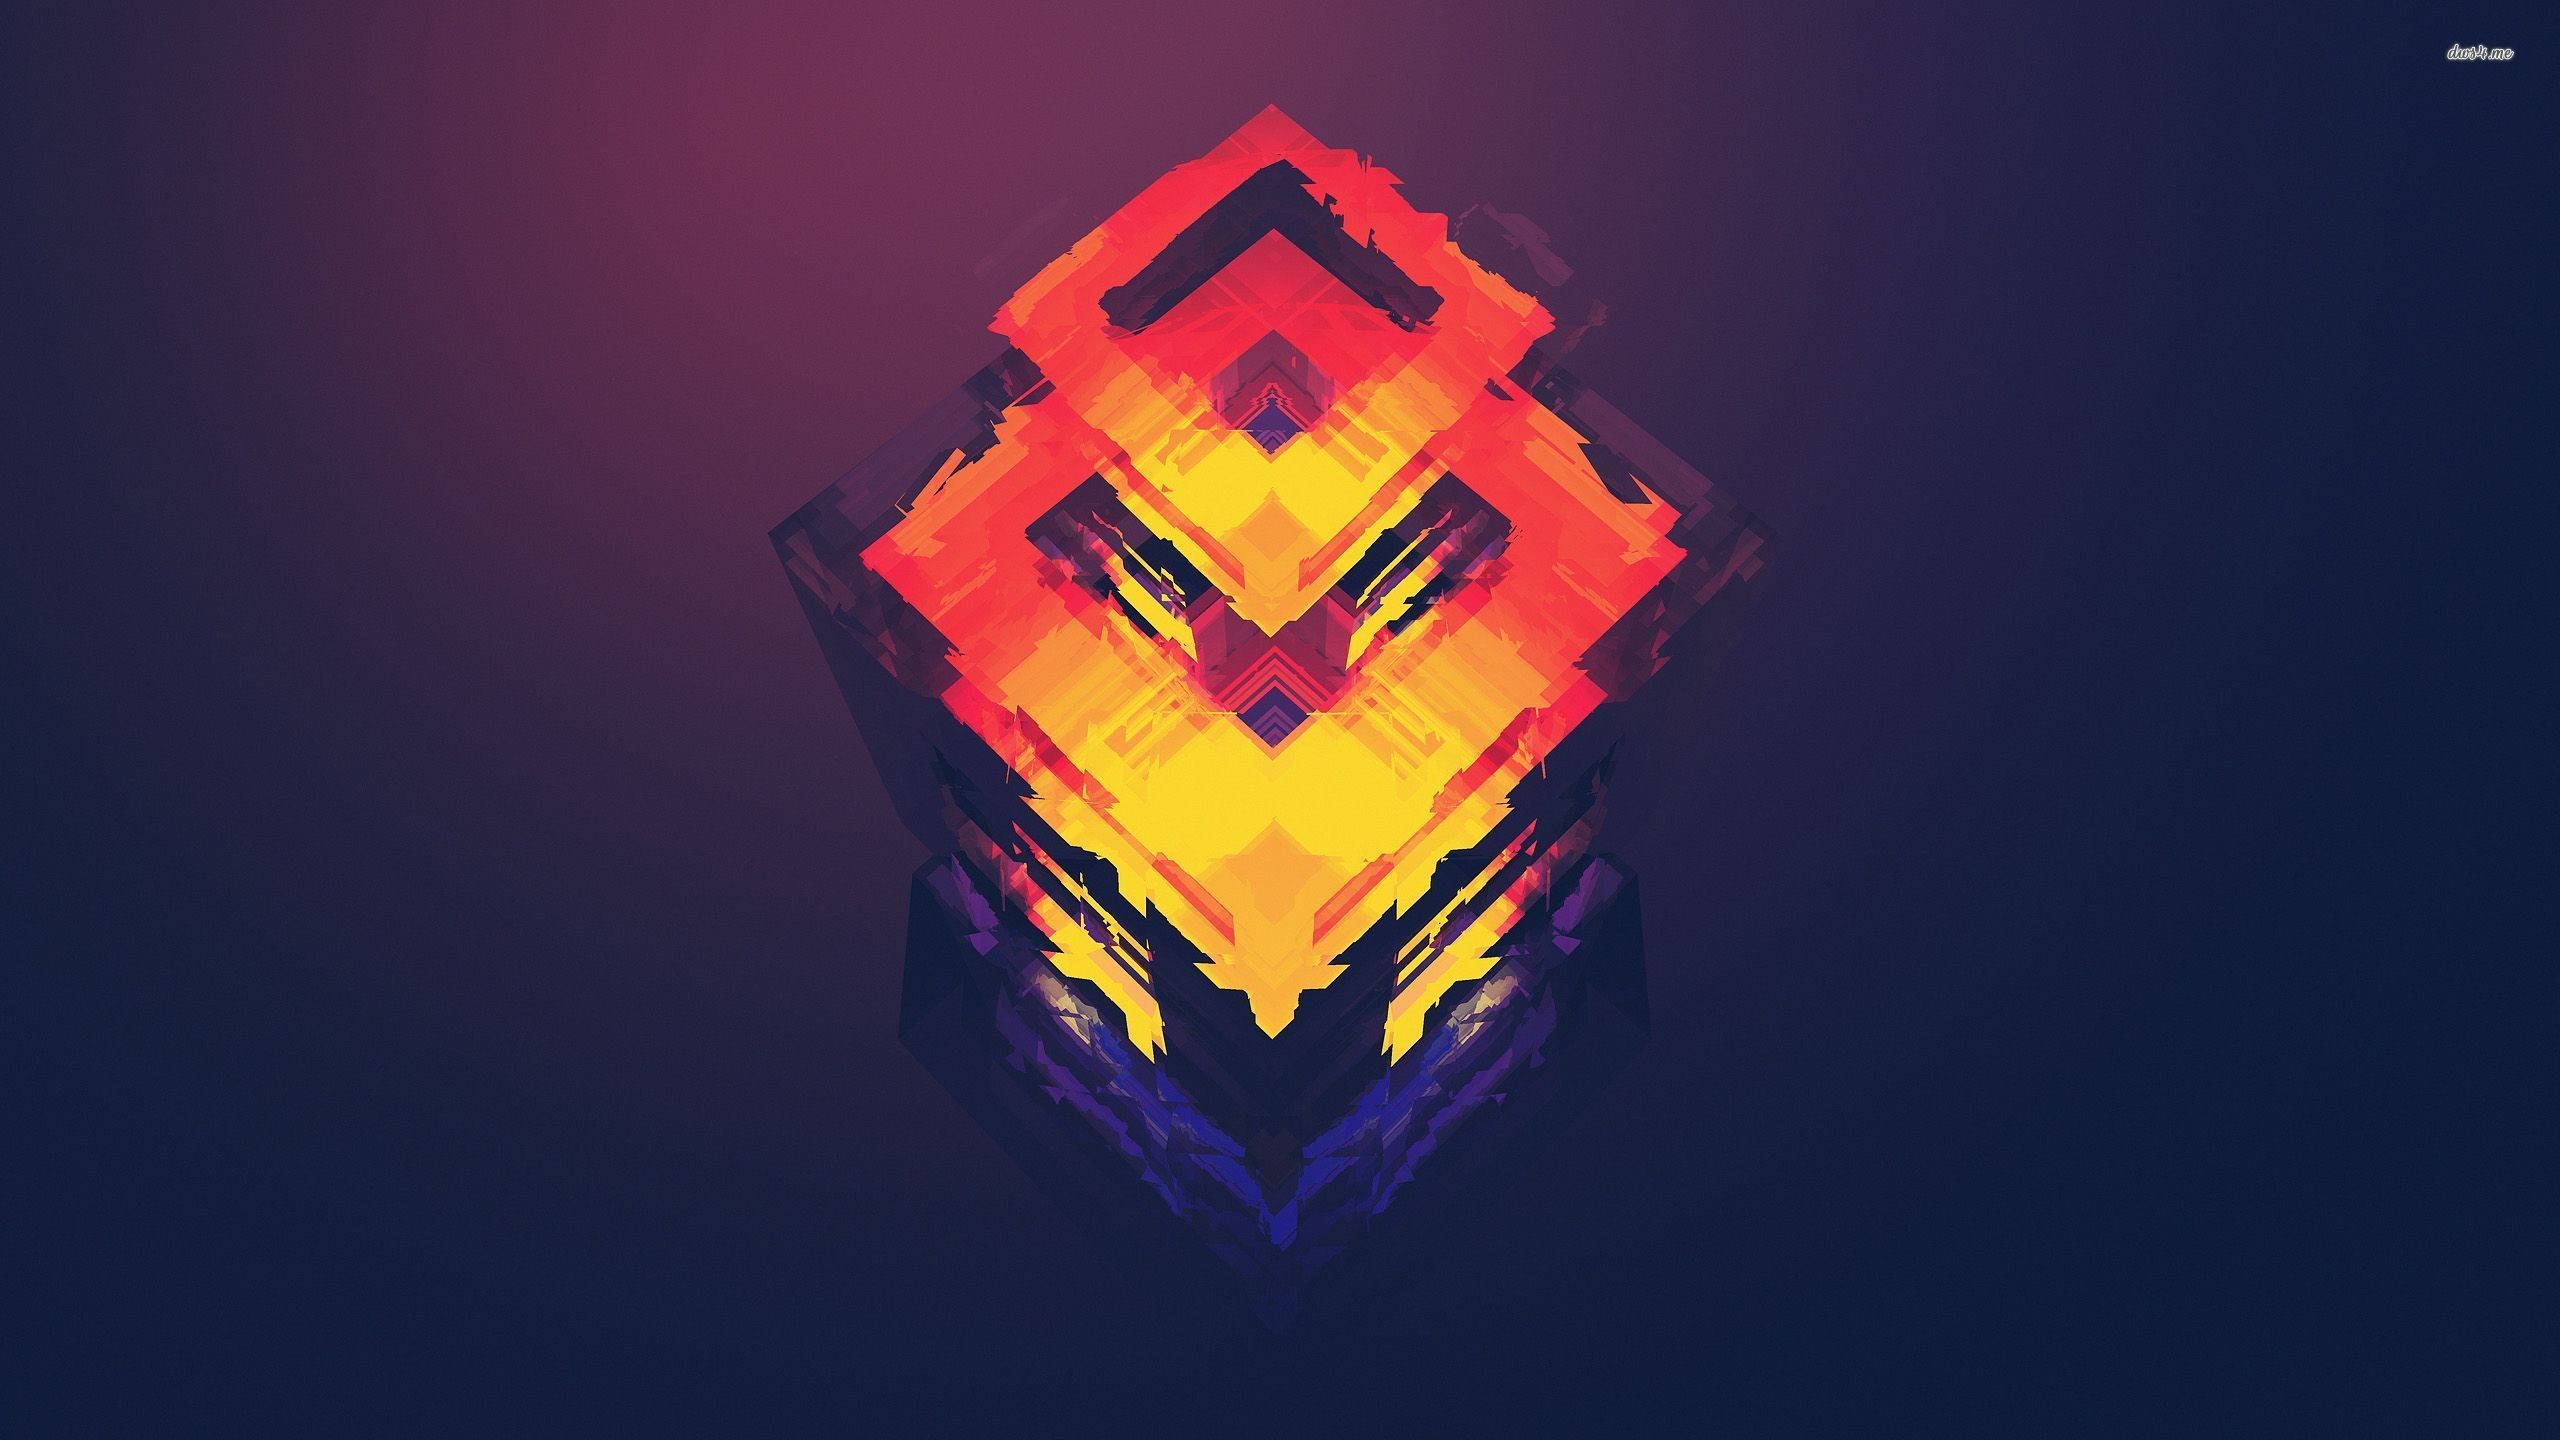 Blurry shapes wallpaper – Abstract wallpapers –